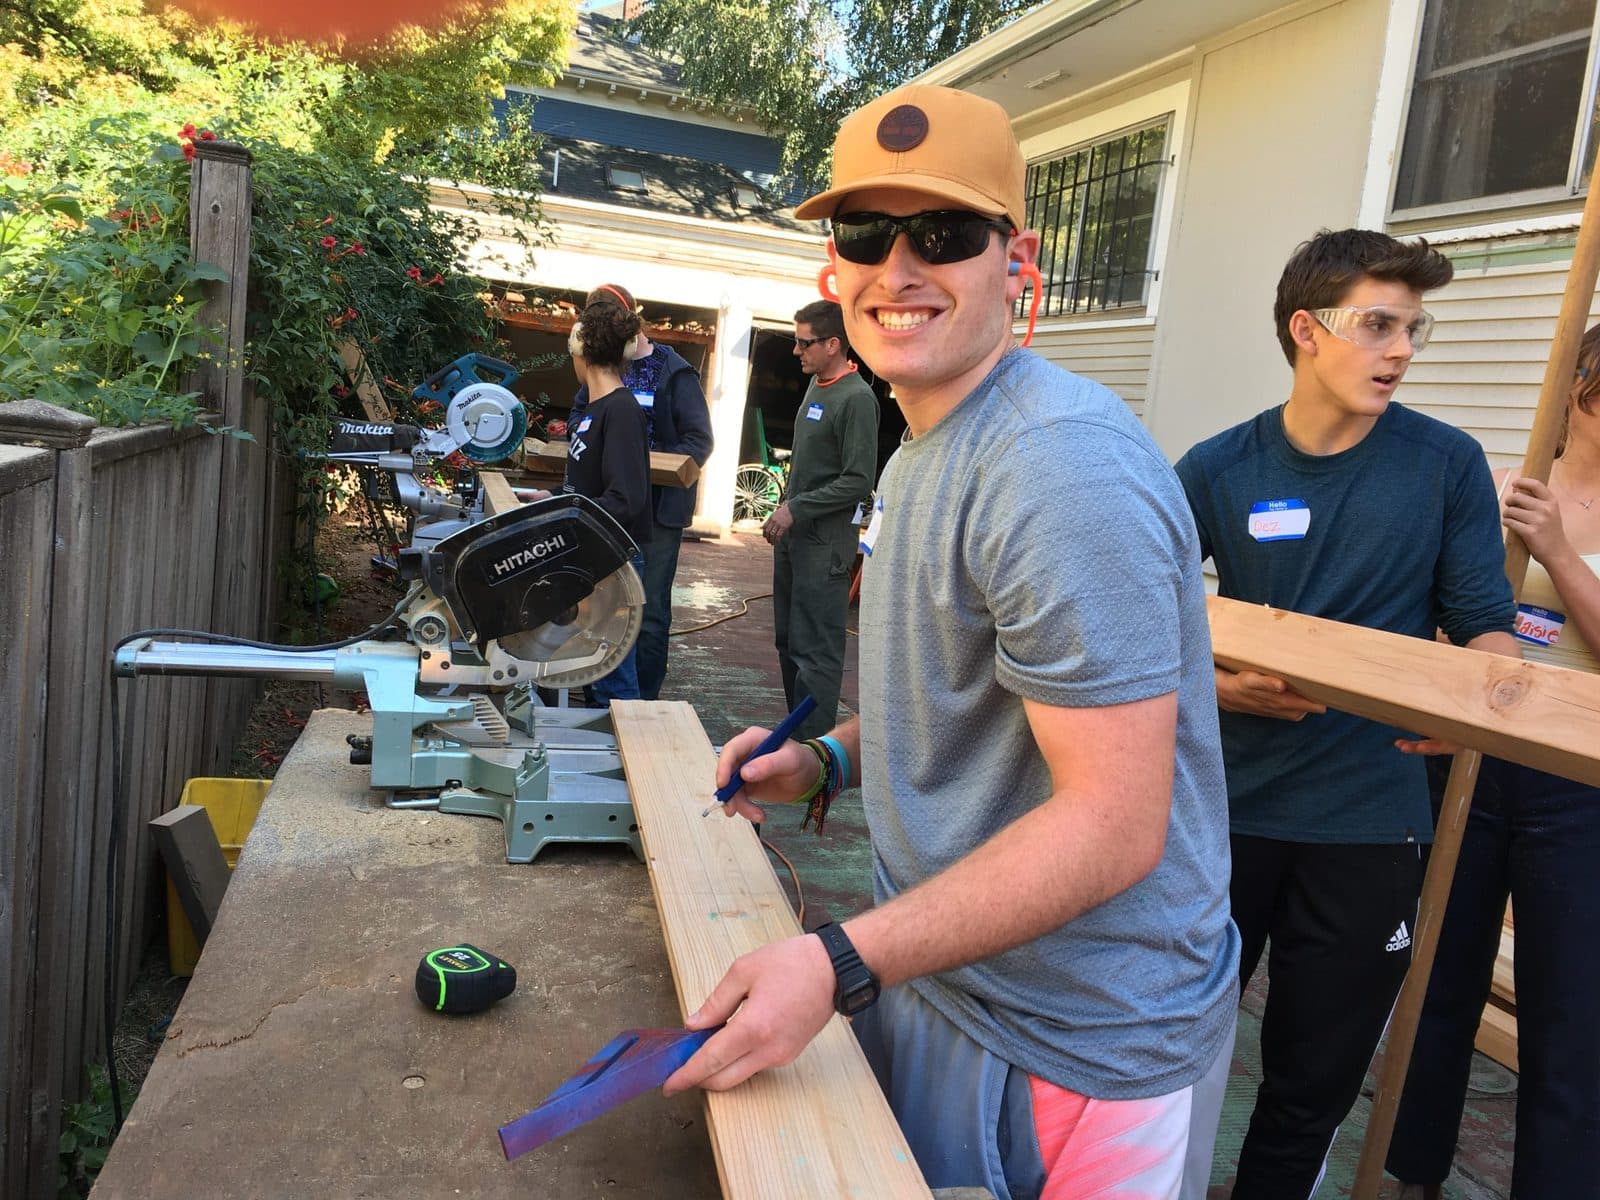 A teenaged boy wearing sunglasses and a yellow baseball cap stands next to a chopsaw. He is holding a speed square and a construction pencil over a plank of wood, and is smiling at the camera.